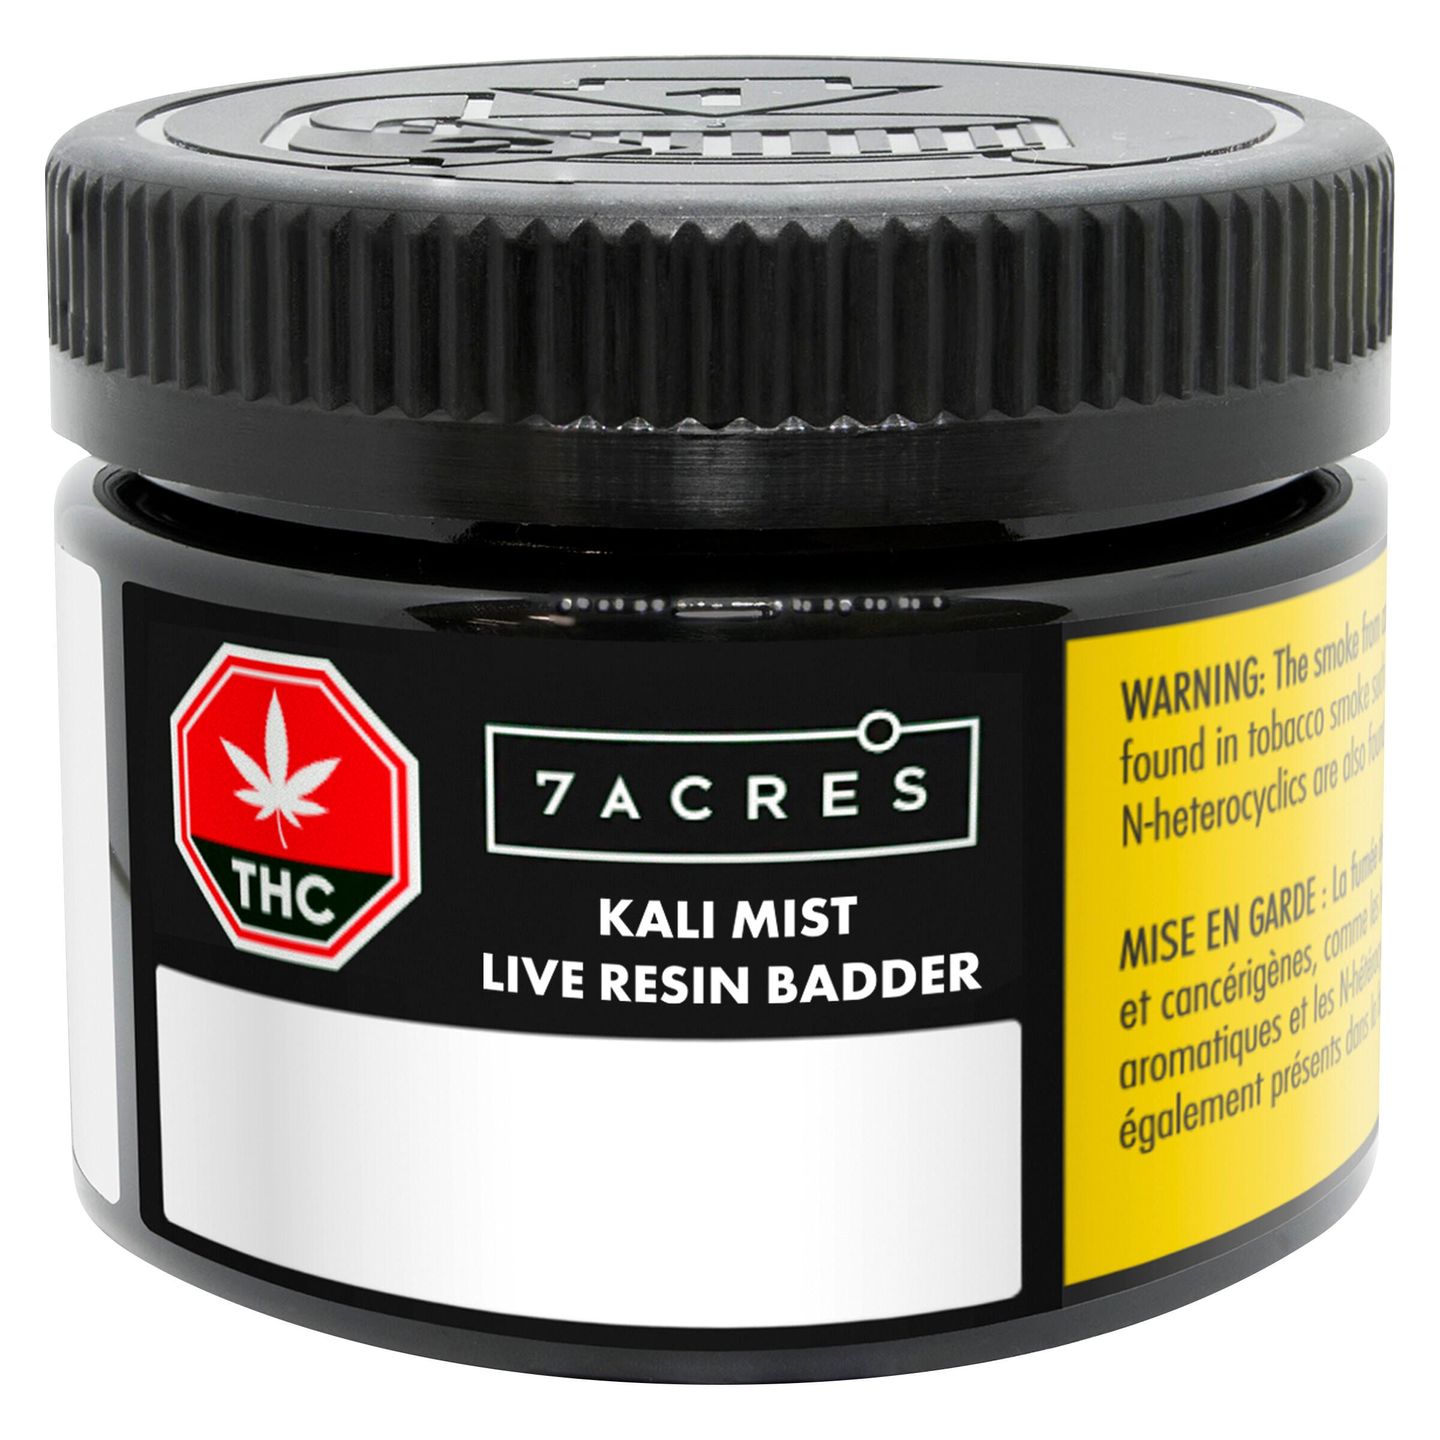 Cannabis Product Kali Mist Live Resin Badder by 7ACRES - 1